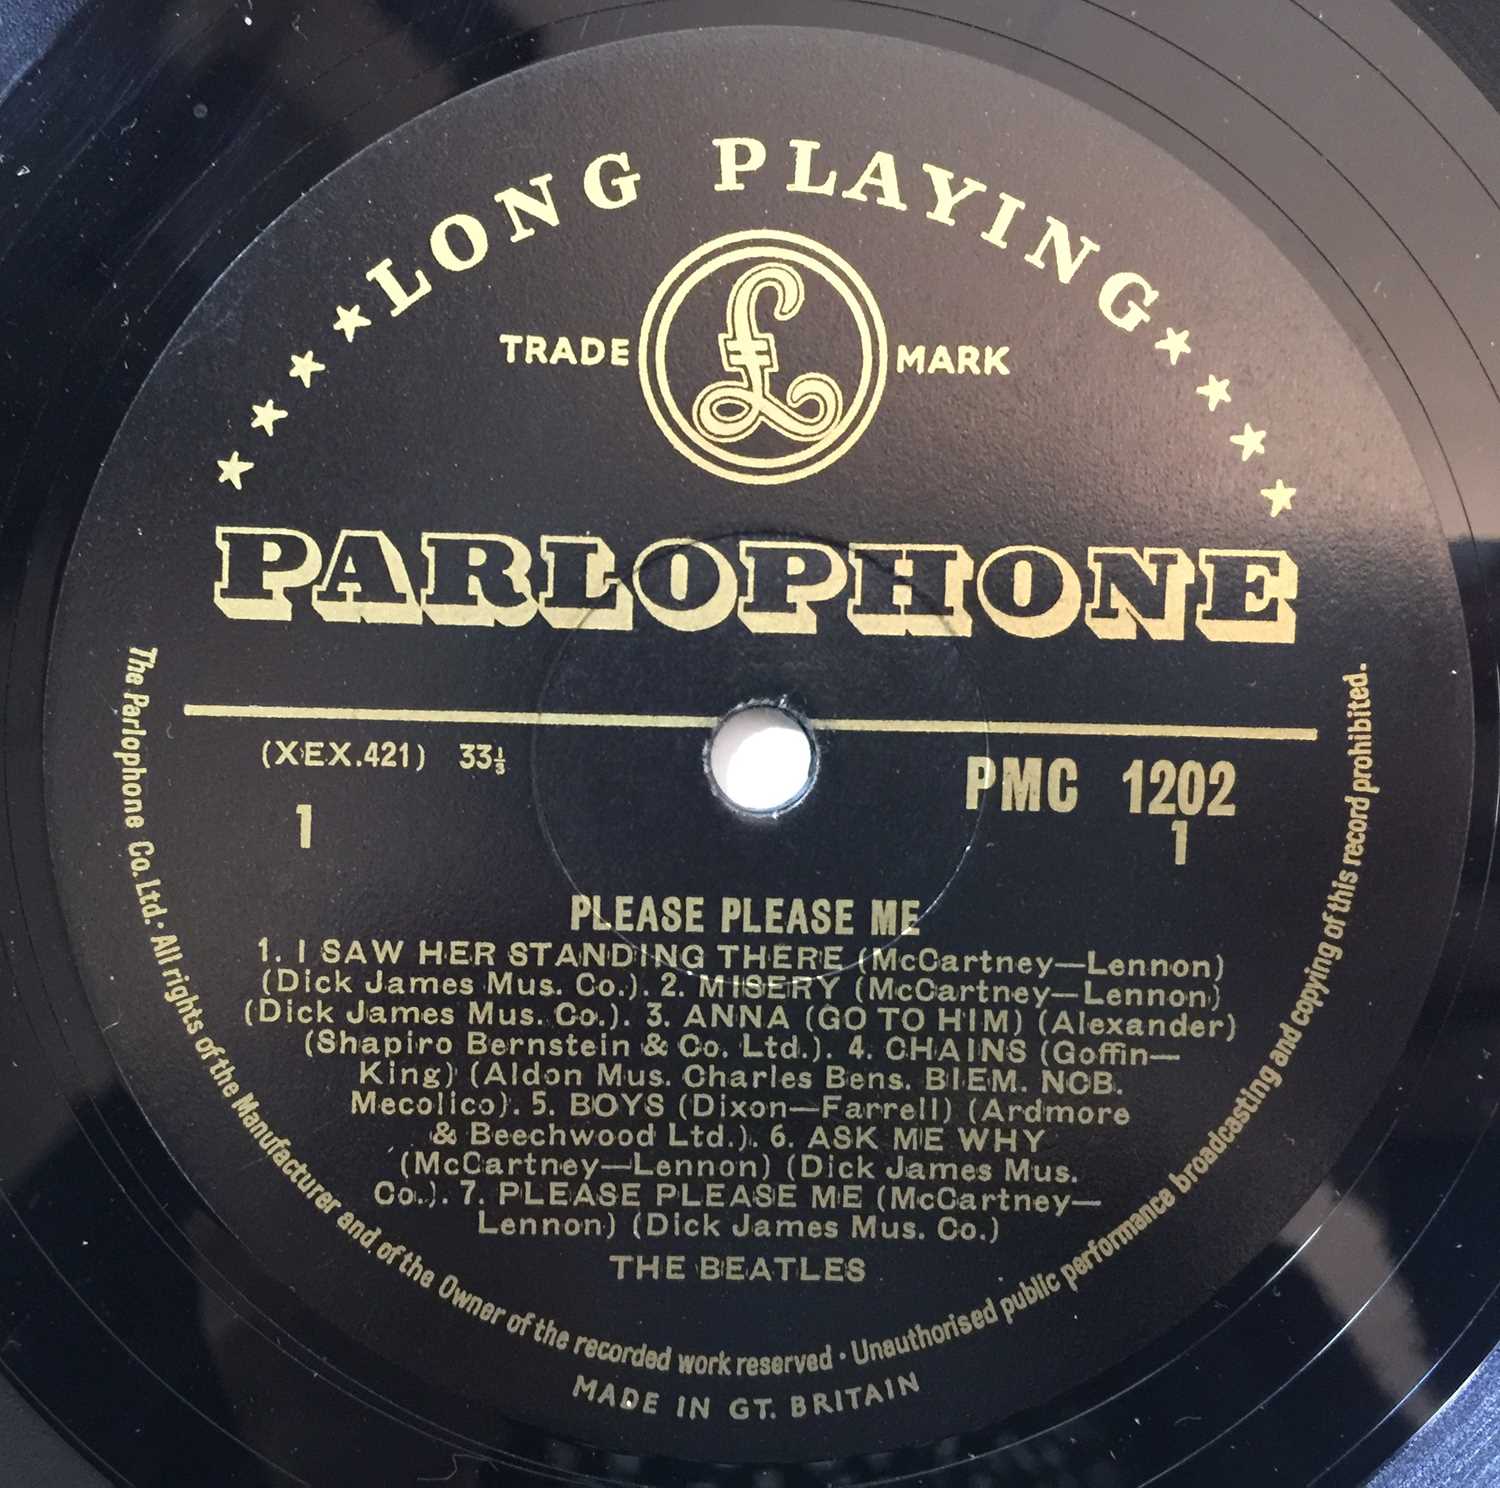 THE BEATLES - PLEASE PLEASE ME (MONO 'BLACK AND GOLD' ORIGINAL PMC 1202 - SOLID EXAMPLE) - Image 4 of 5